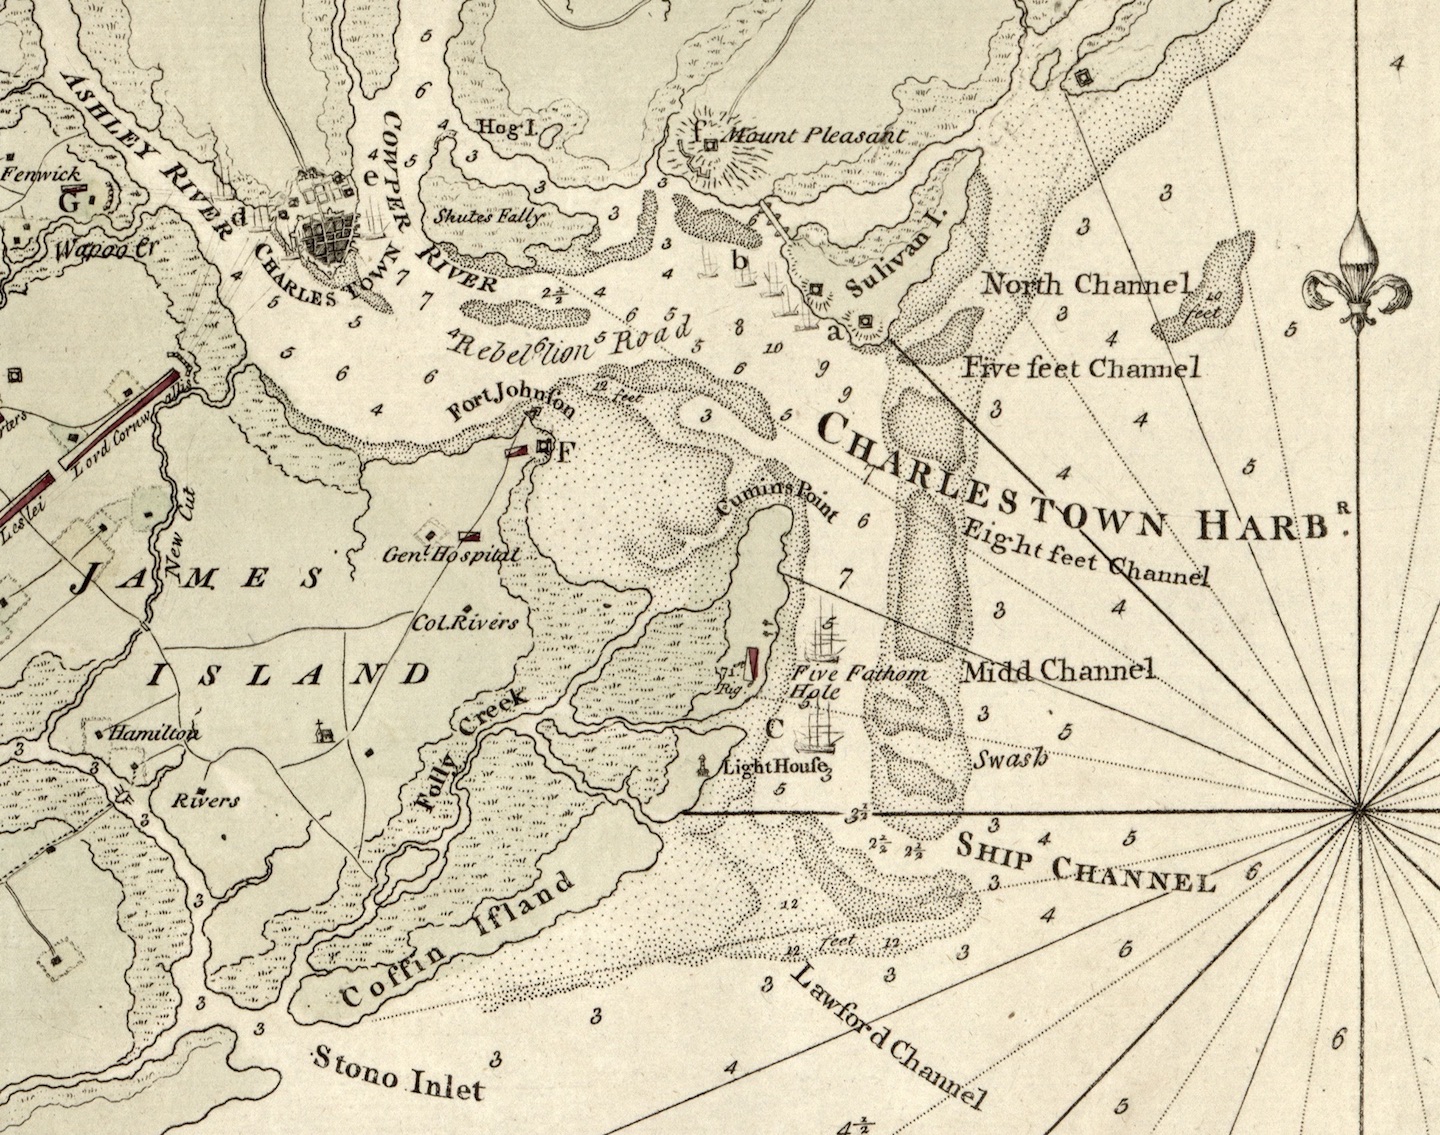 1780 George Sproule map of Charleston Harbor (Source: Library of Congress)